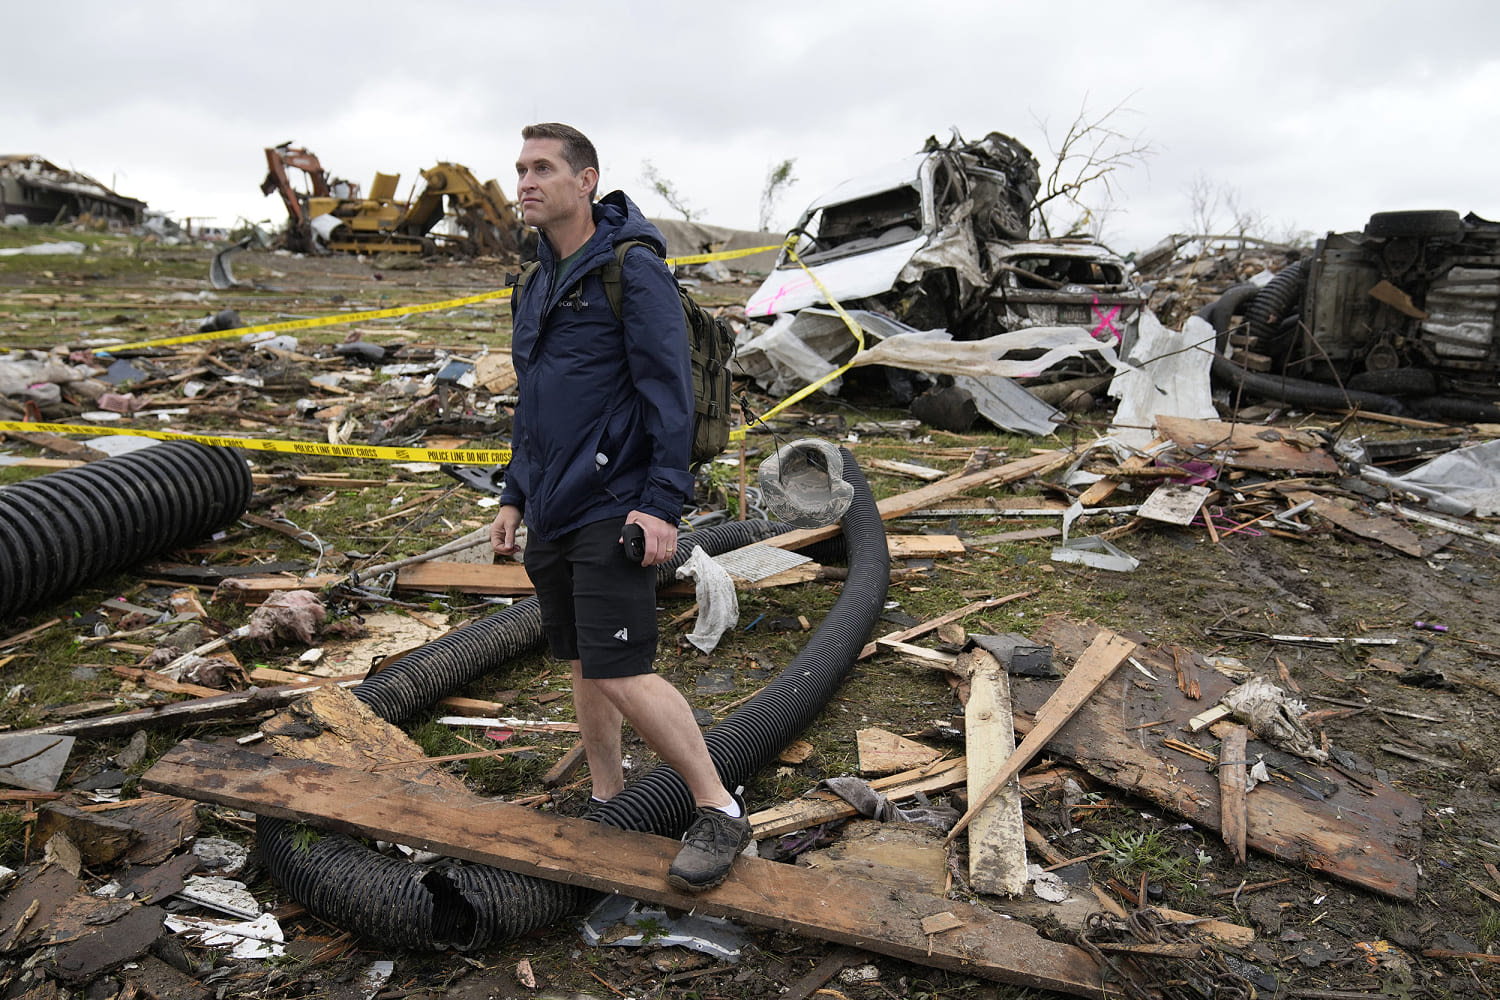 Severe weather moves east, putting 44 million at risk after deadly Iowa tornado